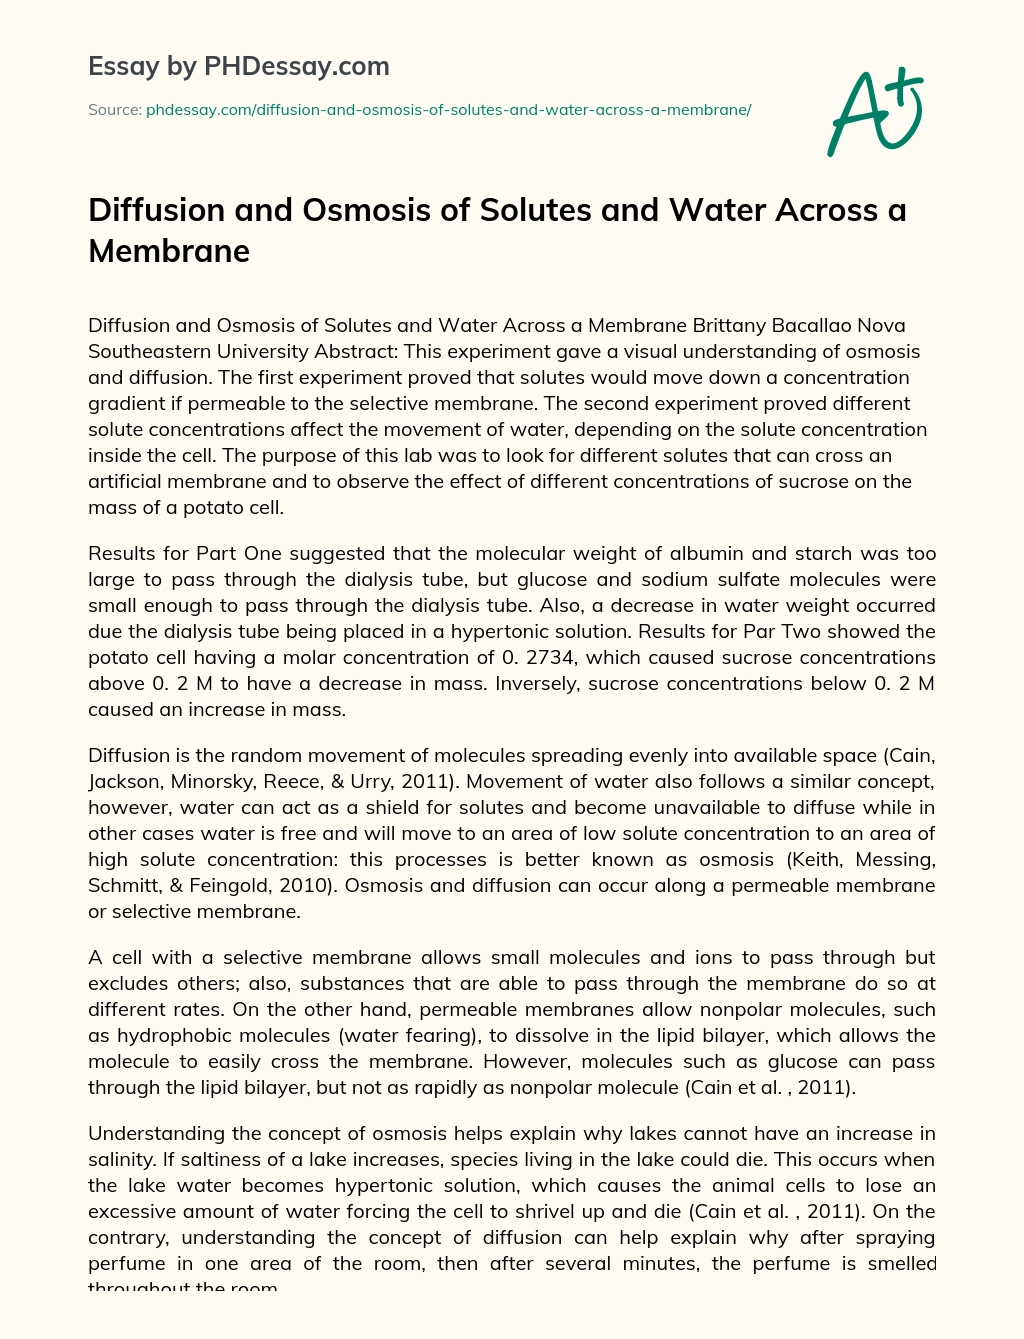 Diffusion and Osmosis of Solutes and Water Across a Membrane essay